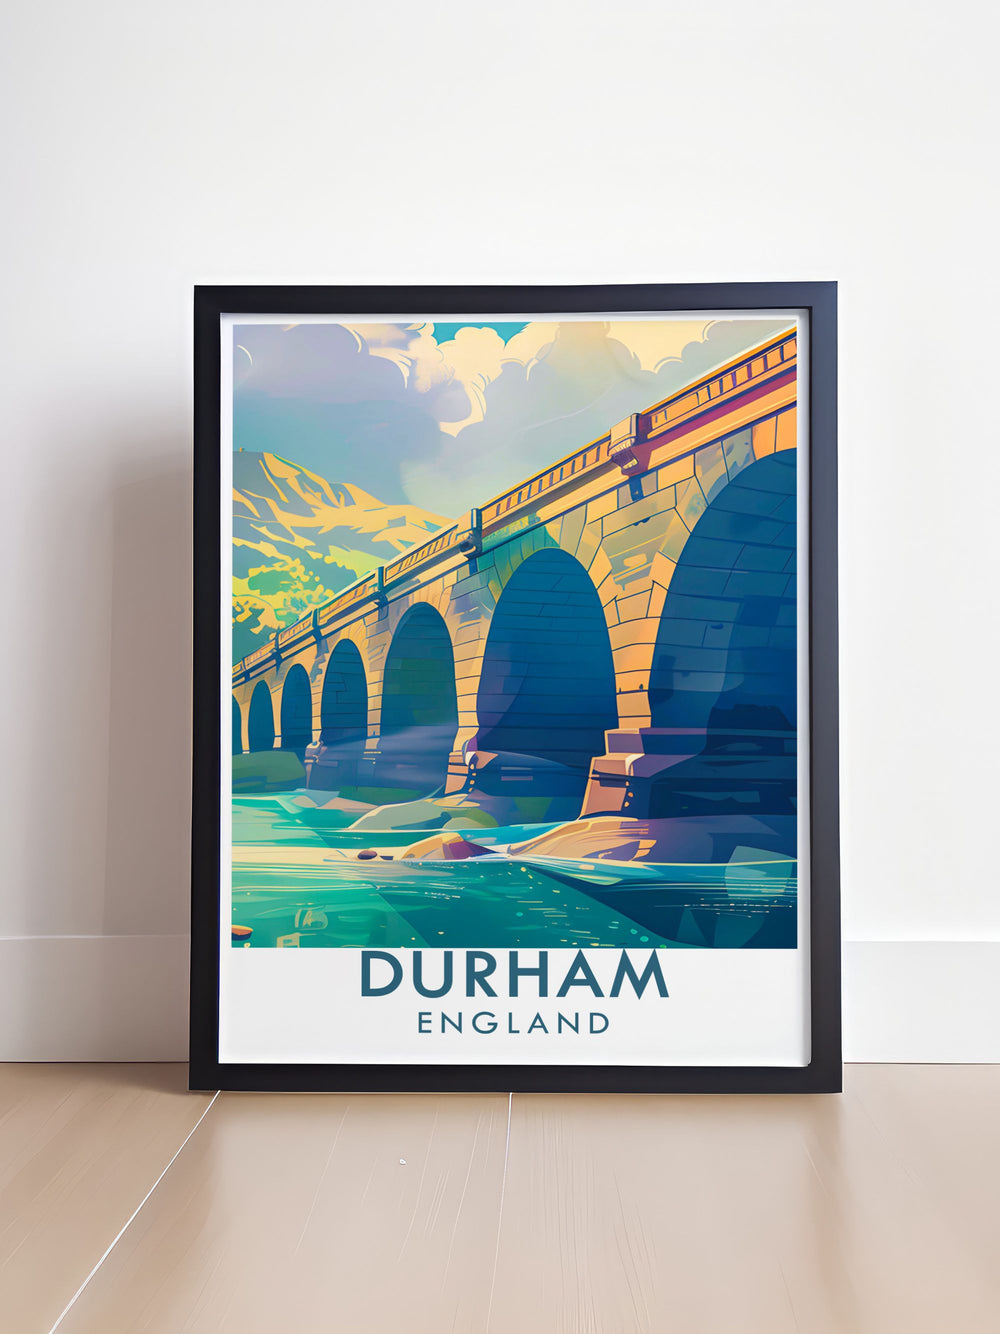 This art print showcases Durhams iconic riverside, dominated by the elegant arches of Prebends Bridge and surrounded by lush greenery, perfect for enhancing any home or office decor.